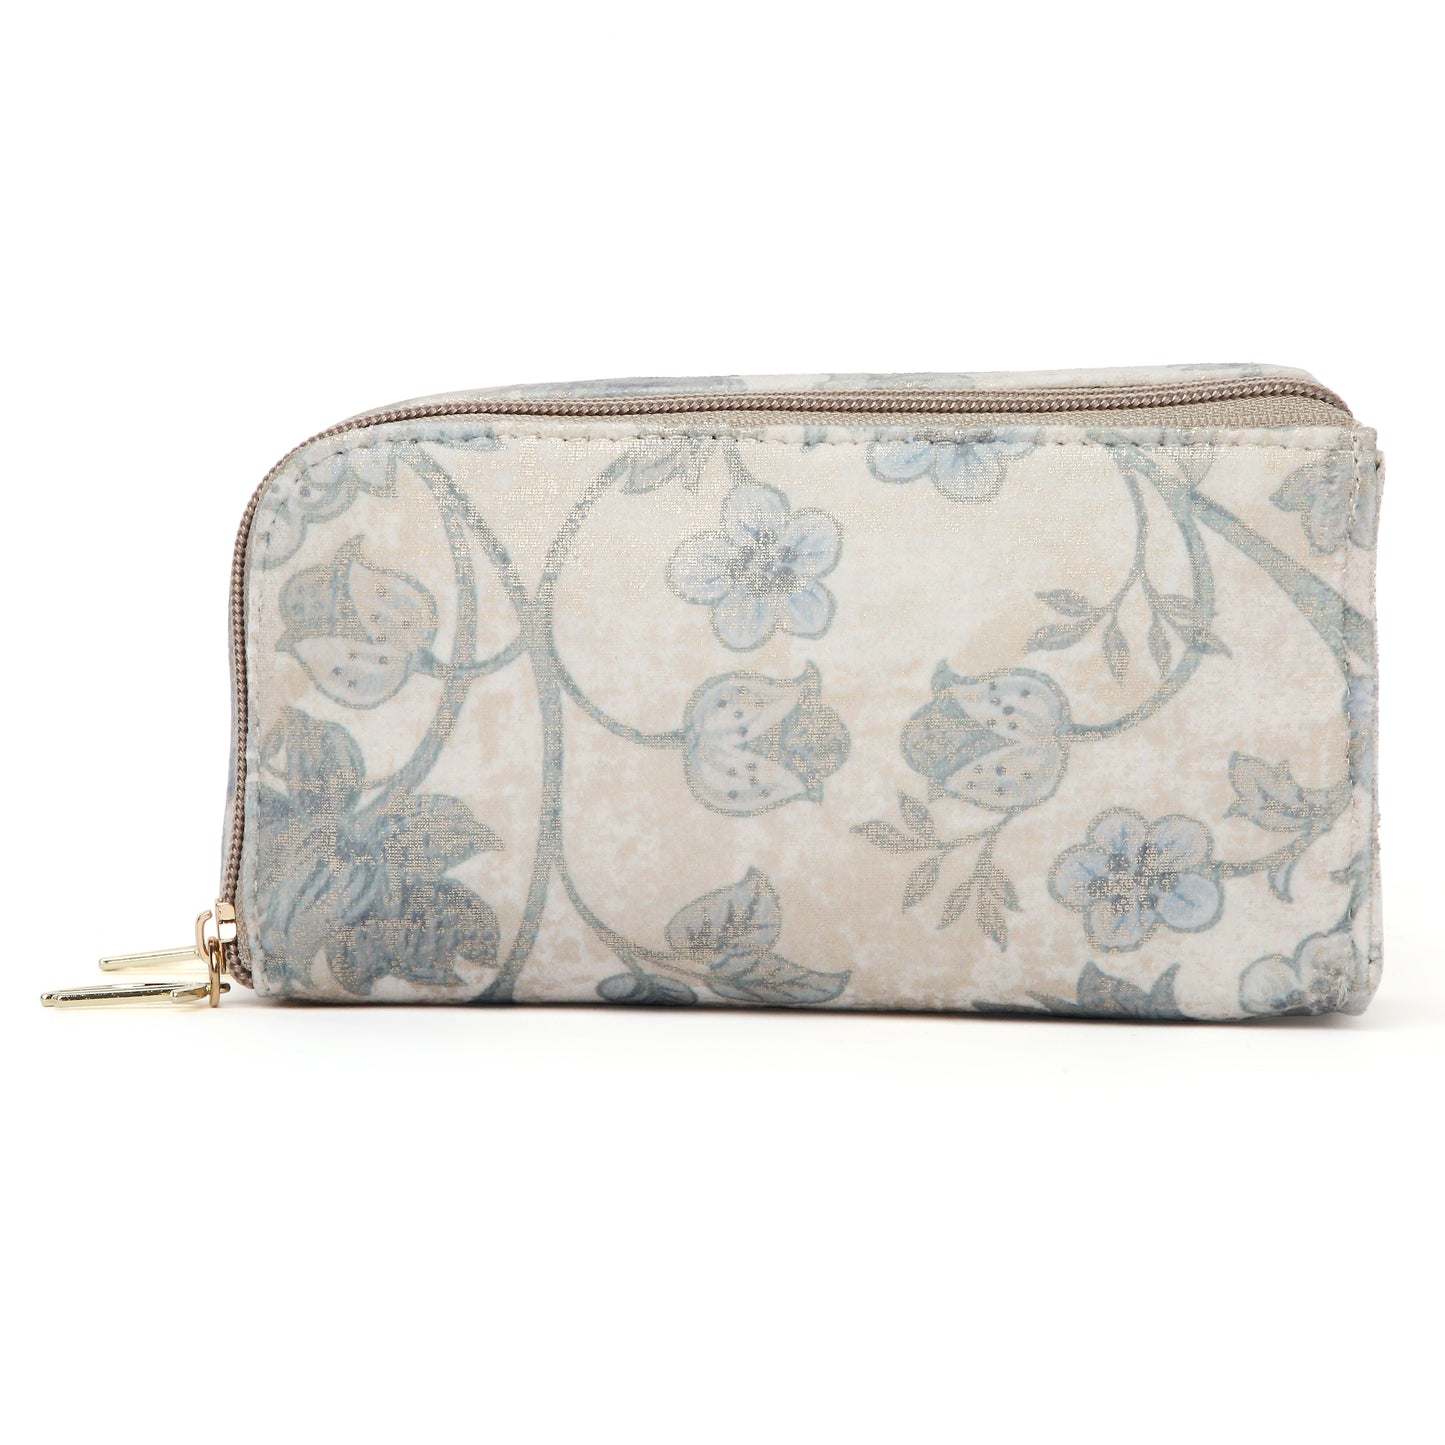 Grey Floral Sunglass Cover